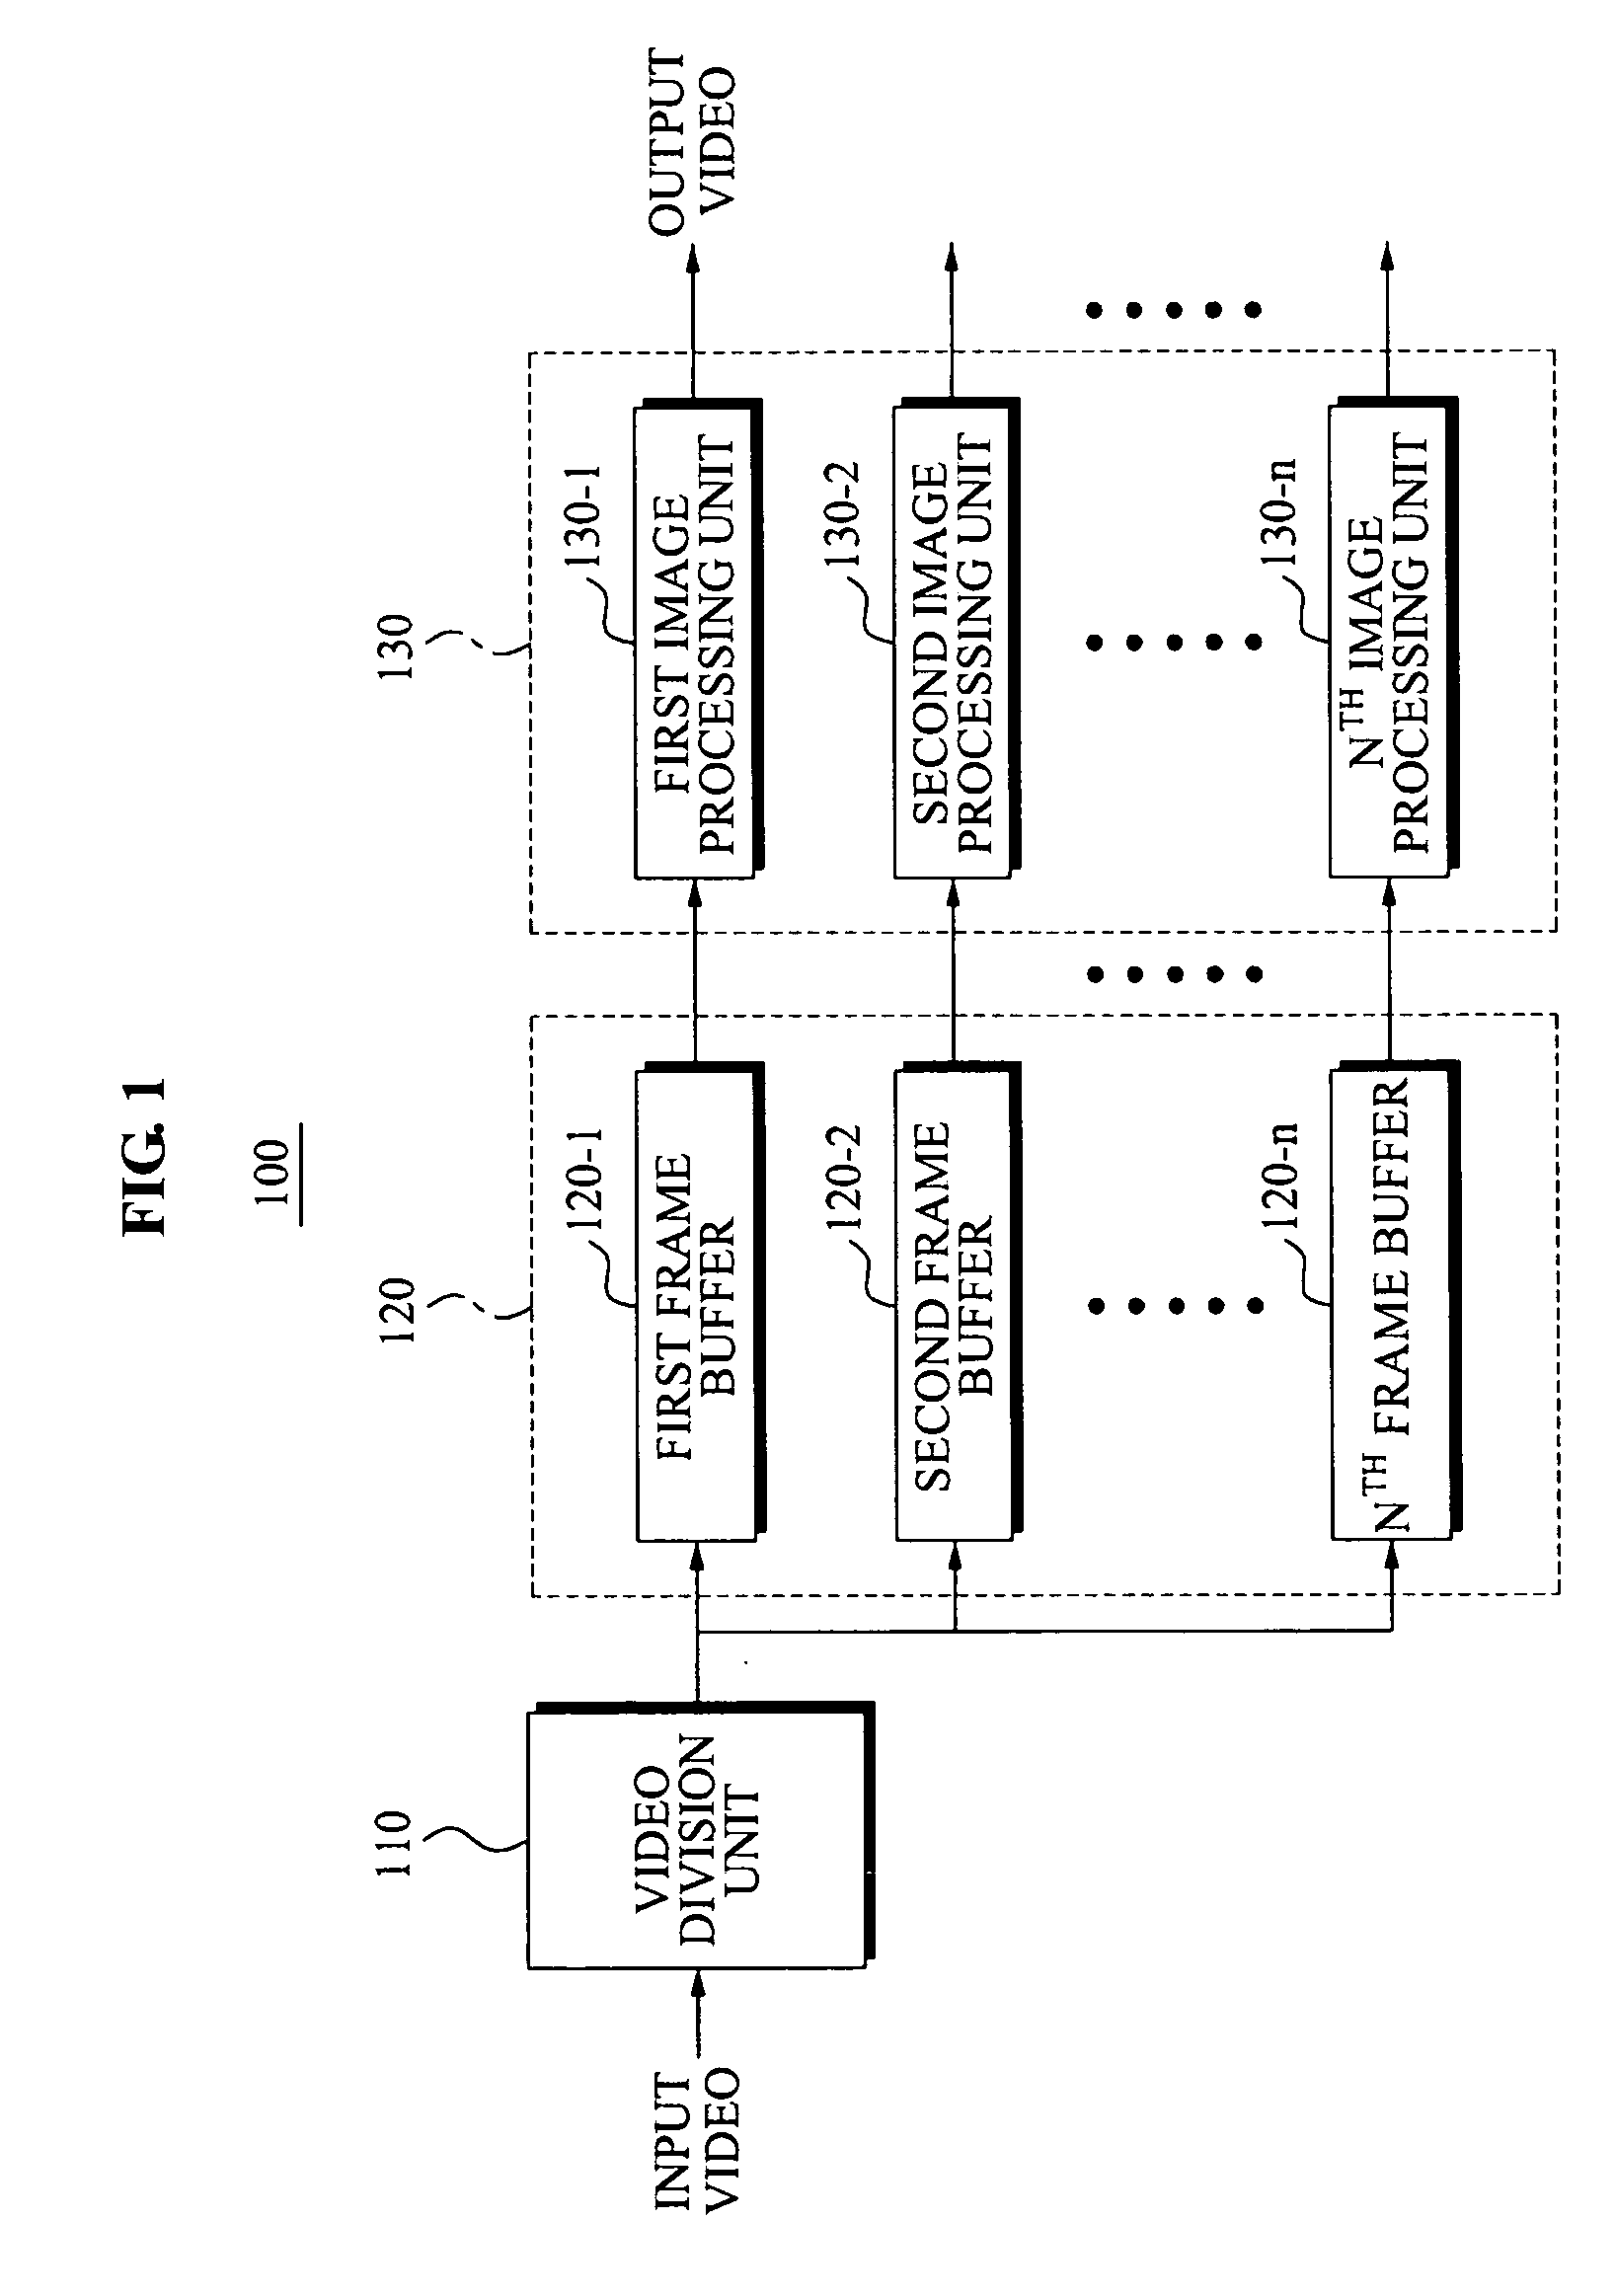 Apparatus and method for ultra-high resolution video processing